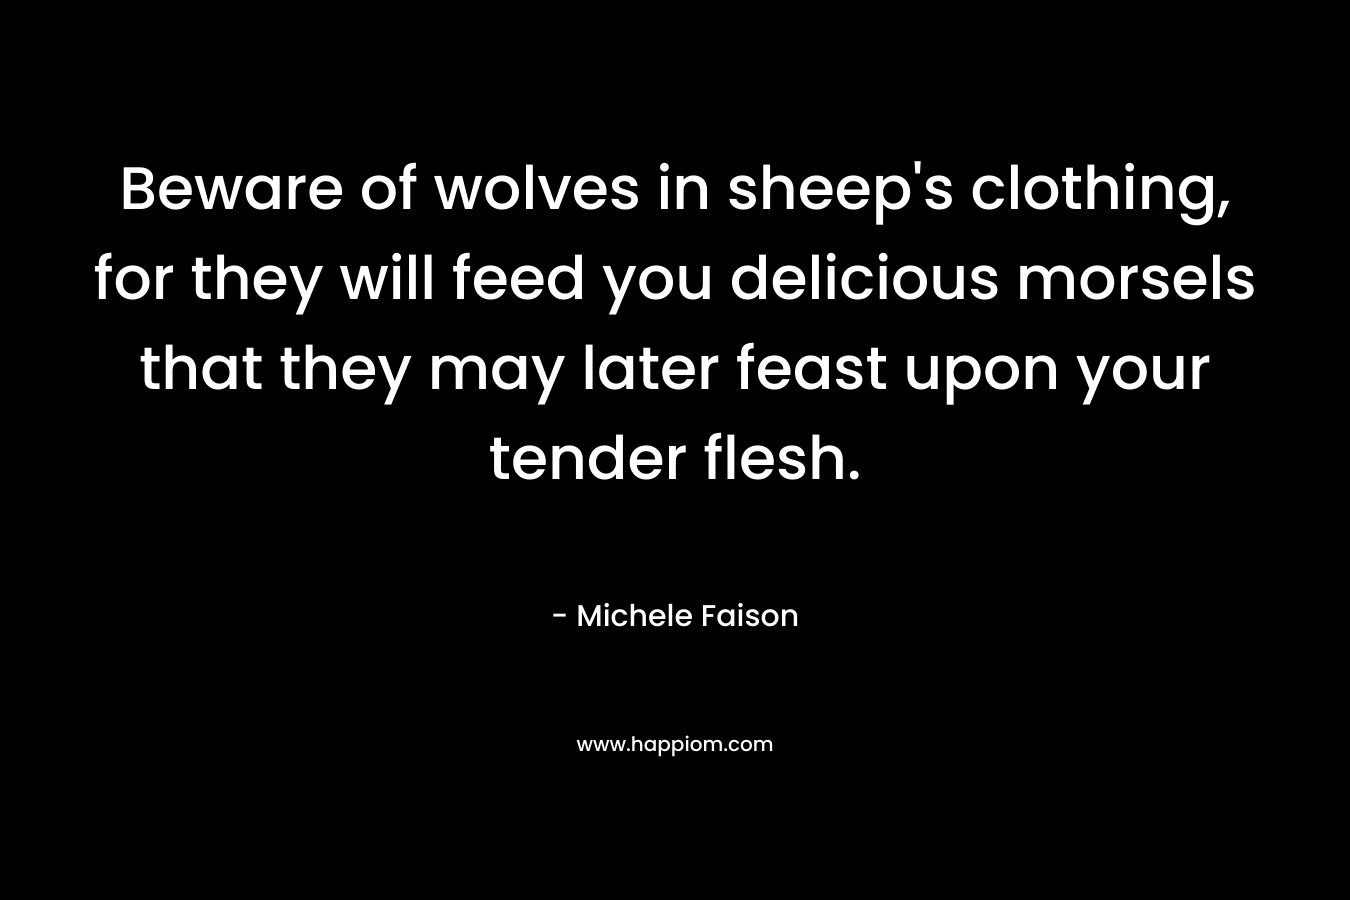 Beware of wolves in sheep’s clothing, for they will feed you delicious morsels that they may later feast upon your tender flesh. – Michele Faison